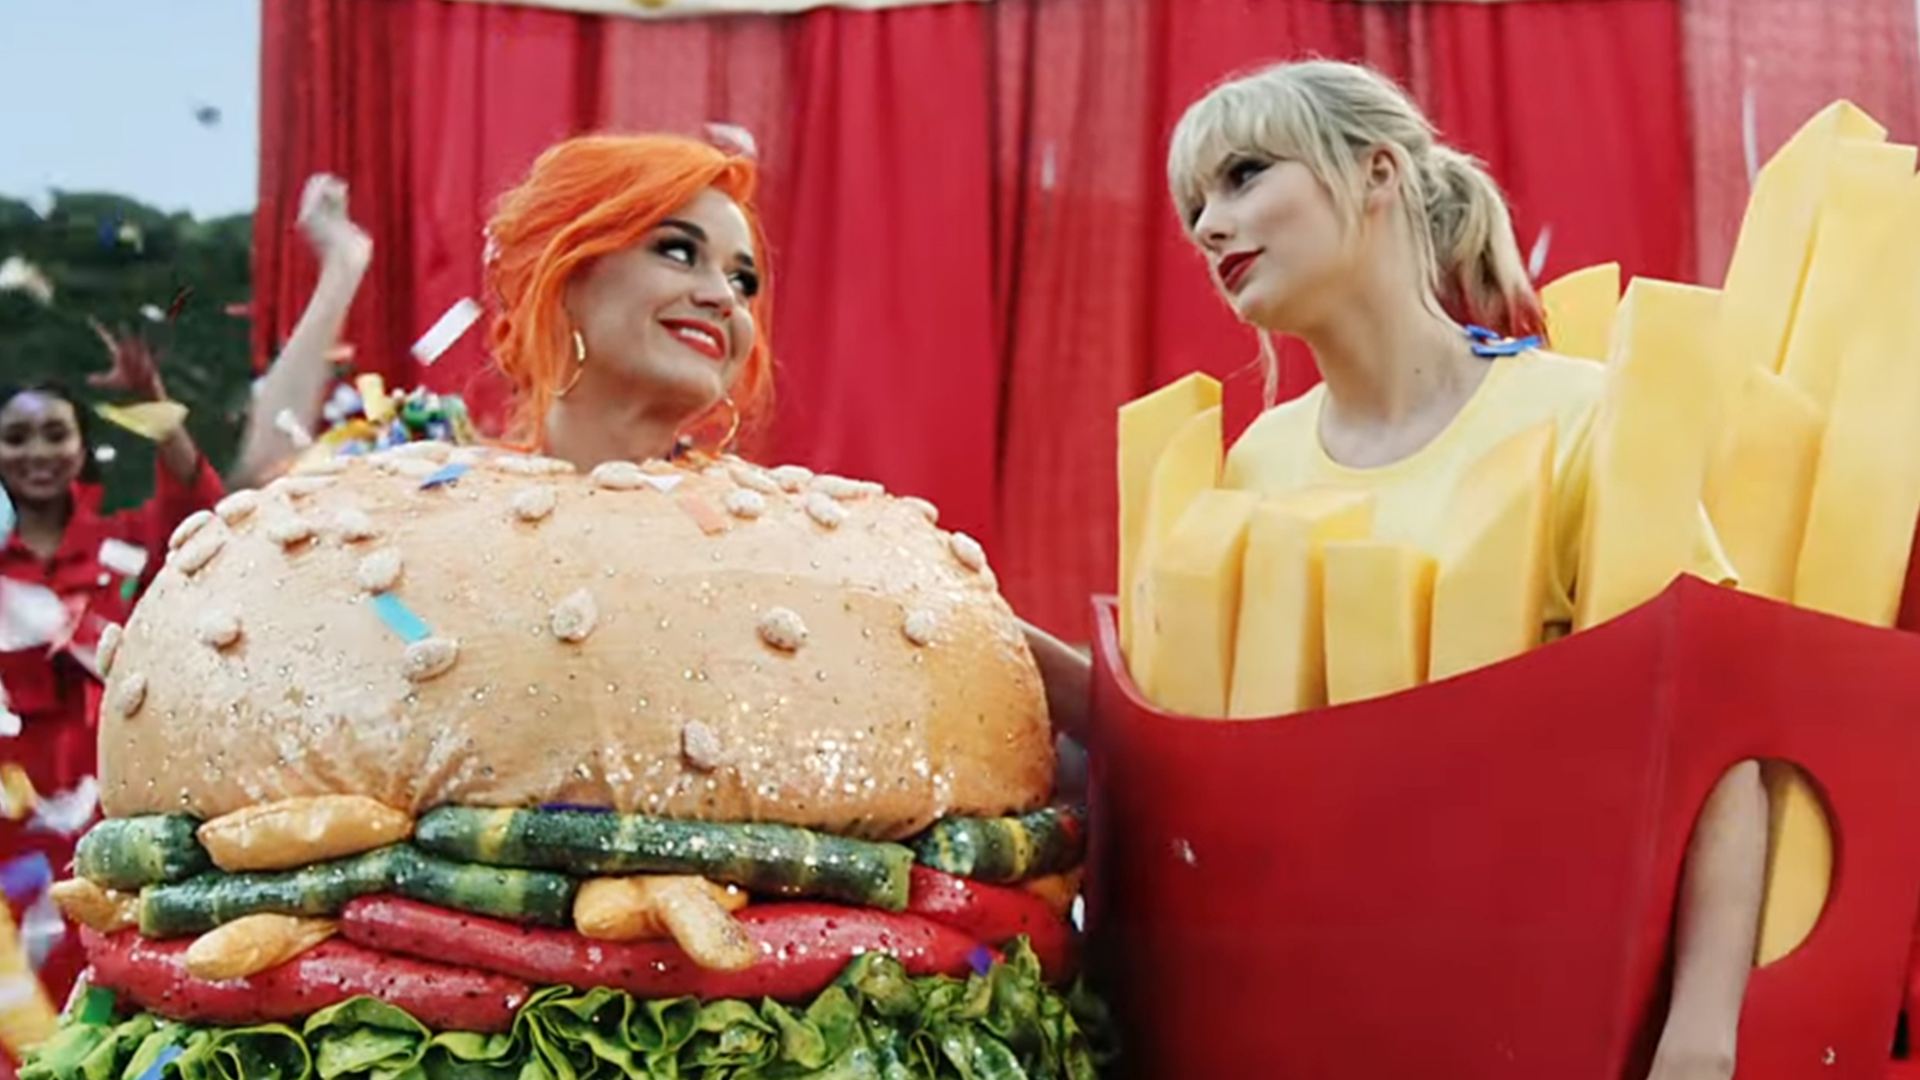 Katy Perry and Taylor